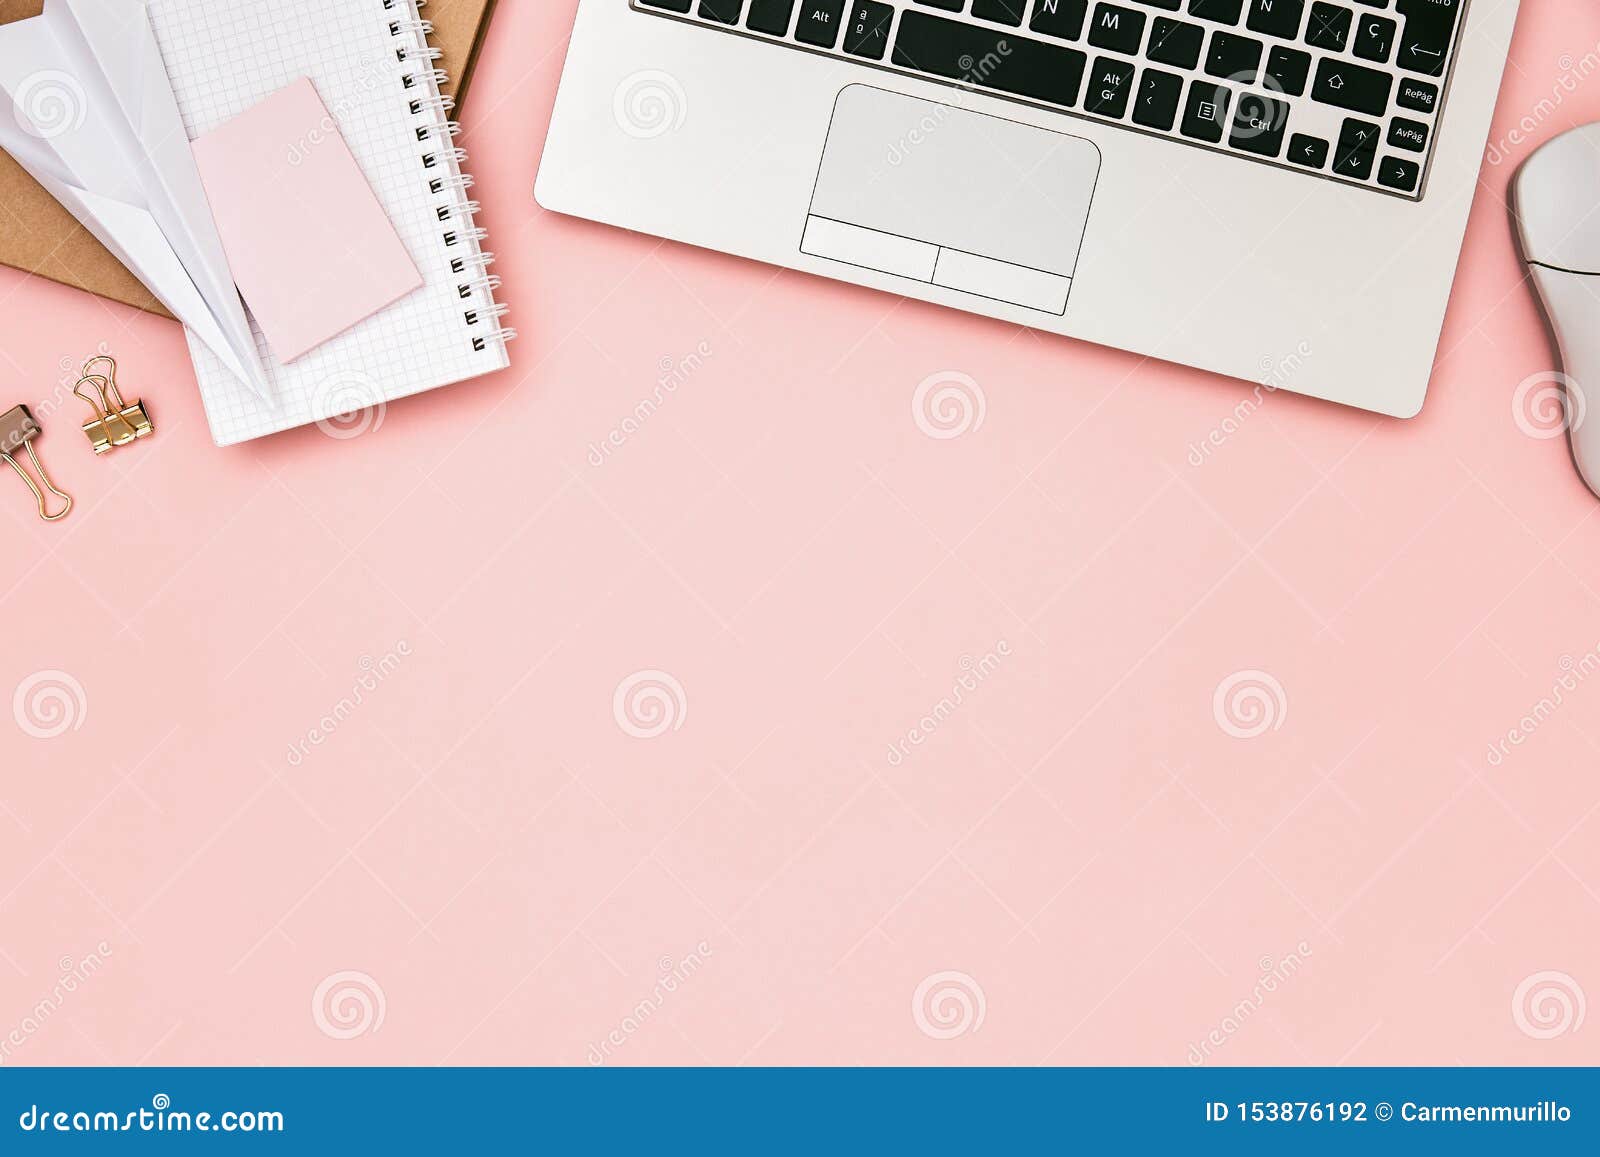 Pink Office Desk Table with Laptop and Copy Space Stock Photo - Image ...